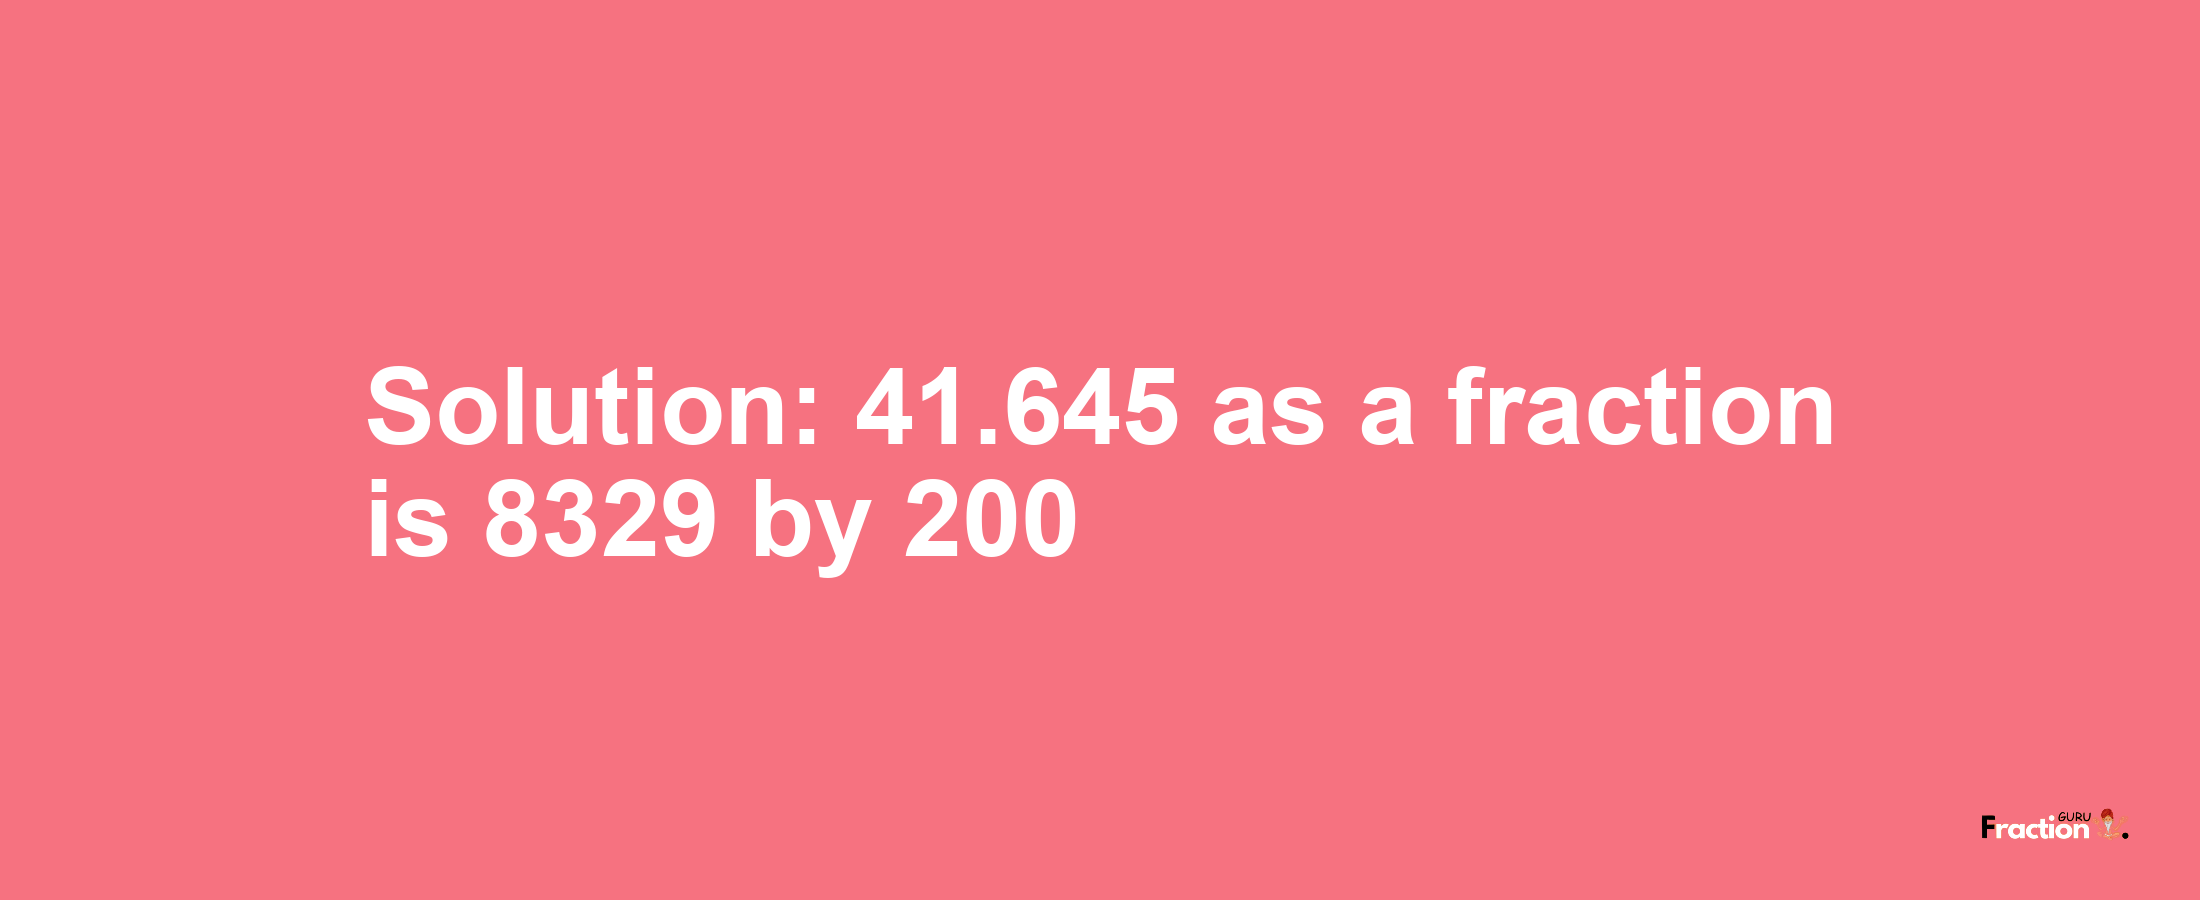 Solution:41.645 as a fraction is 8329/200